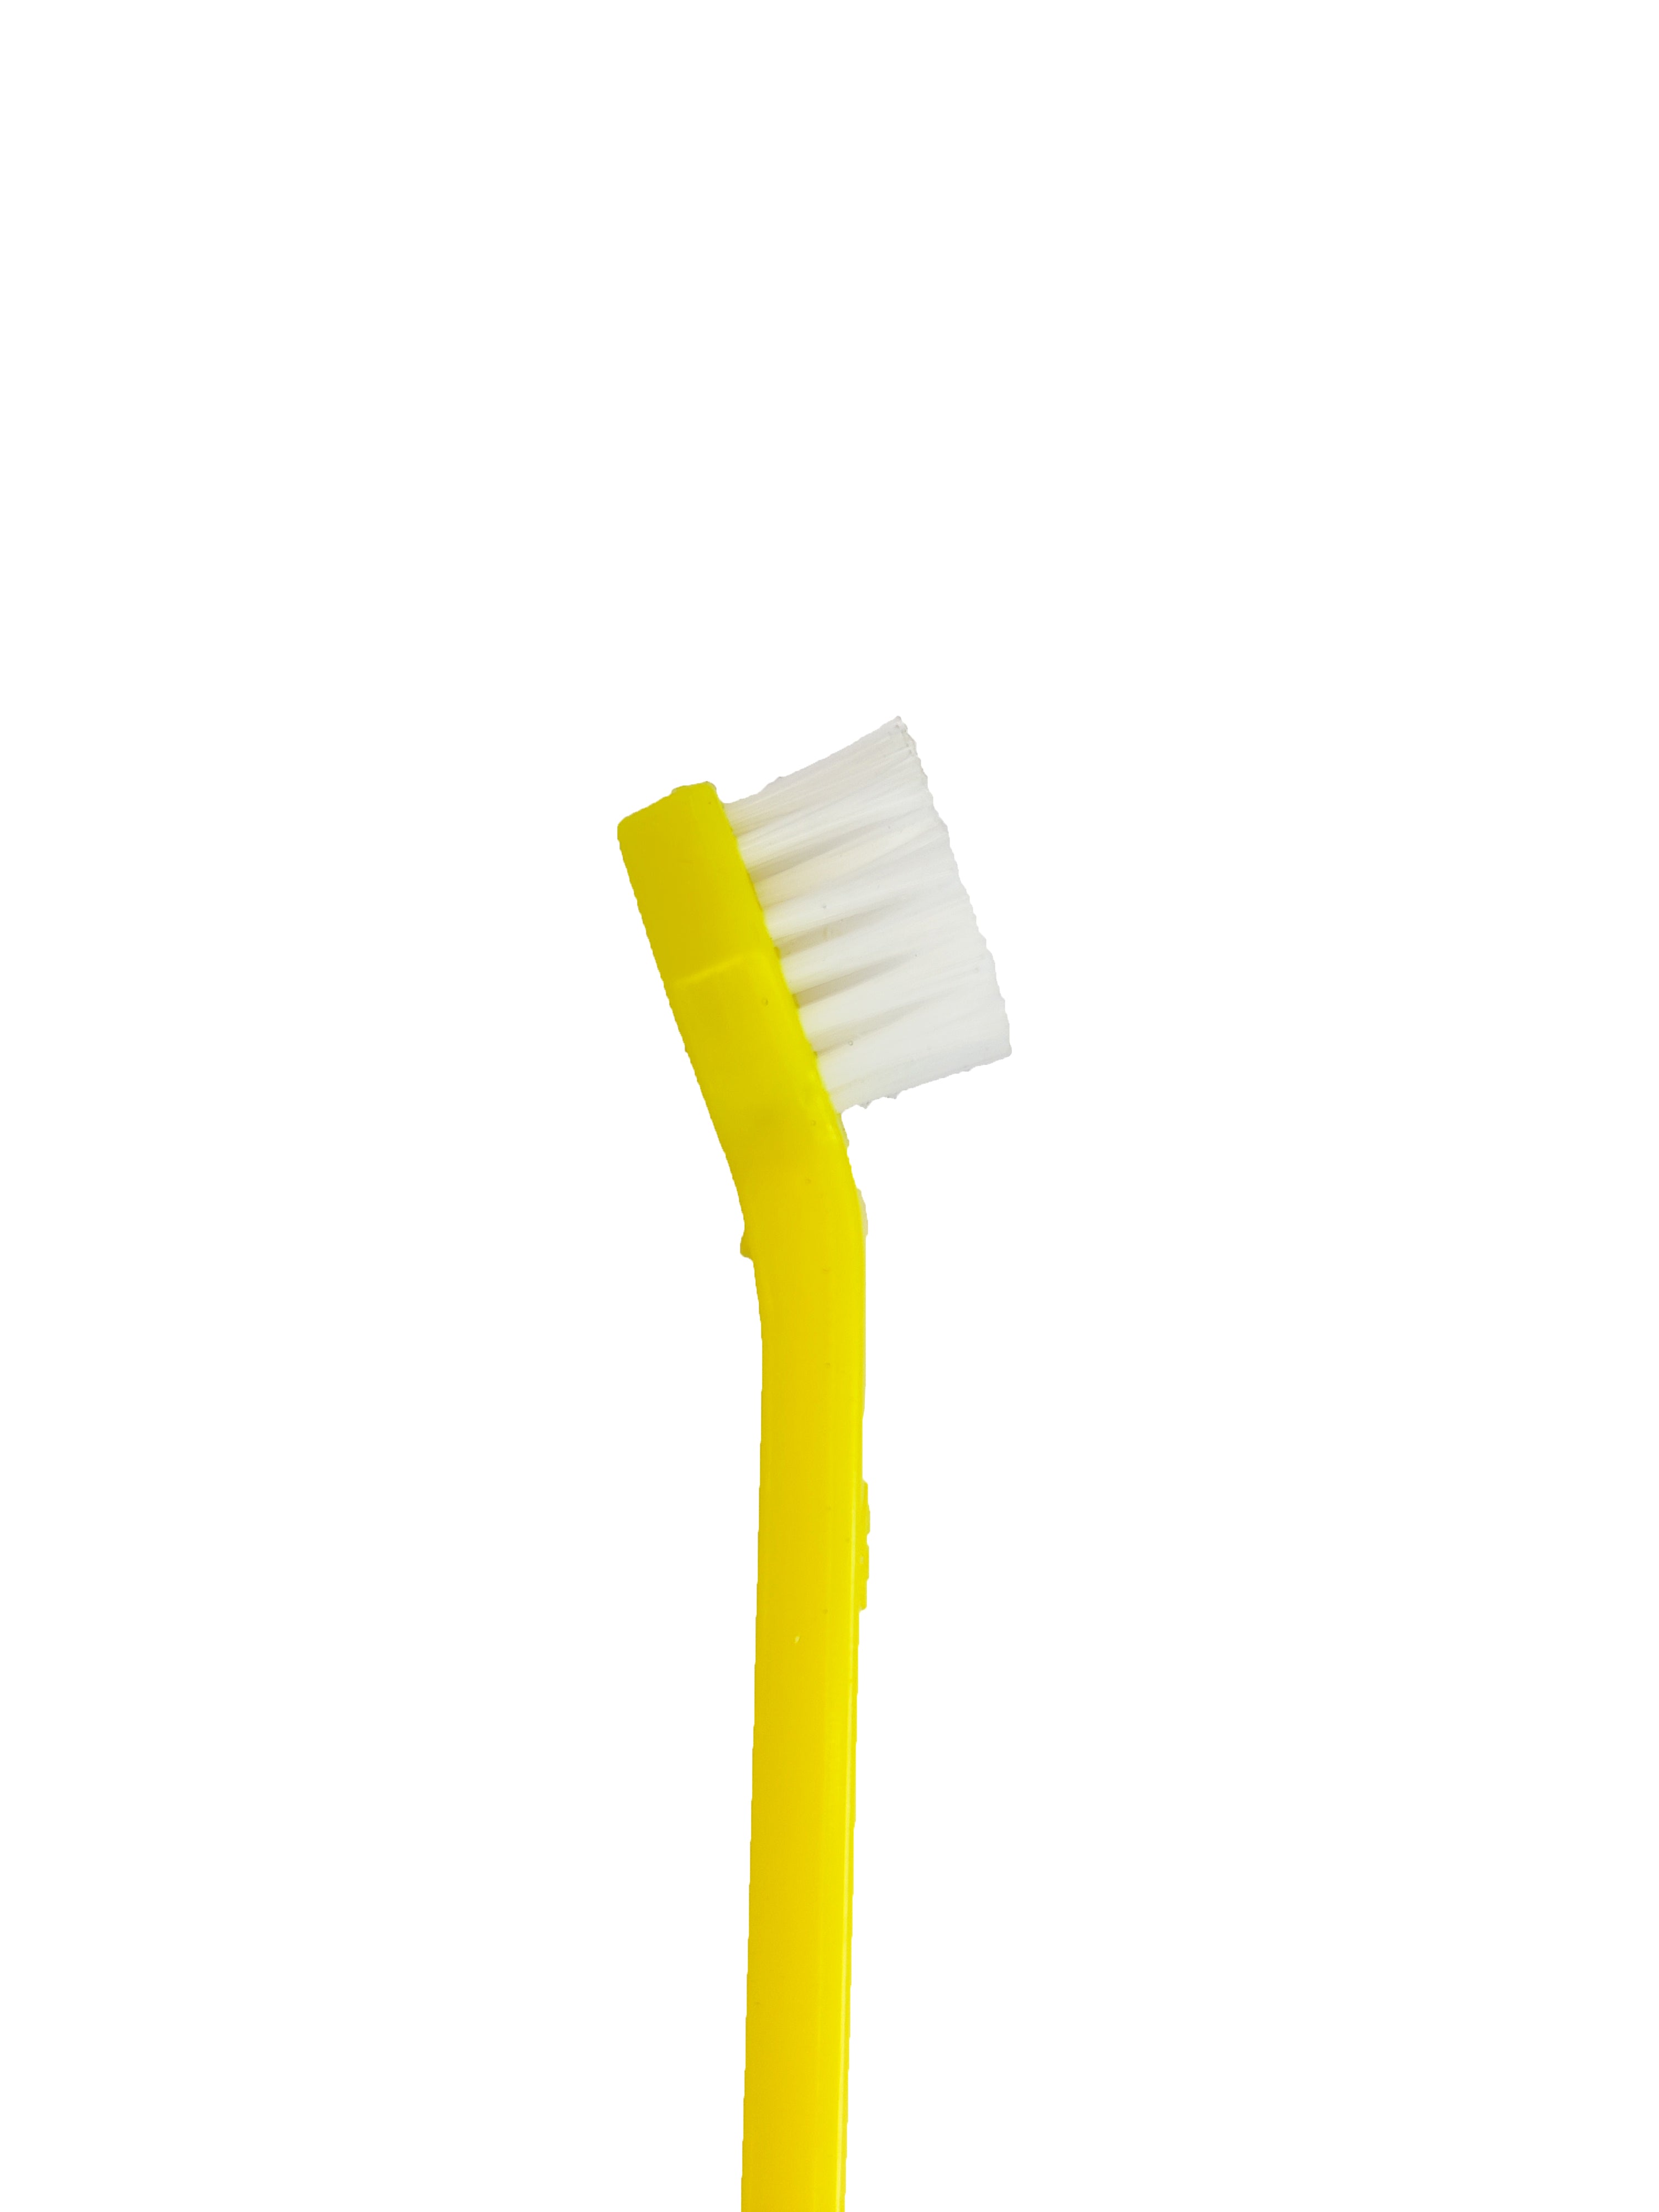 Dual Headed Dog Toothbrush With Set Of 2 Finger Toothbrush